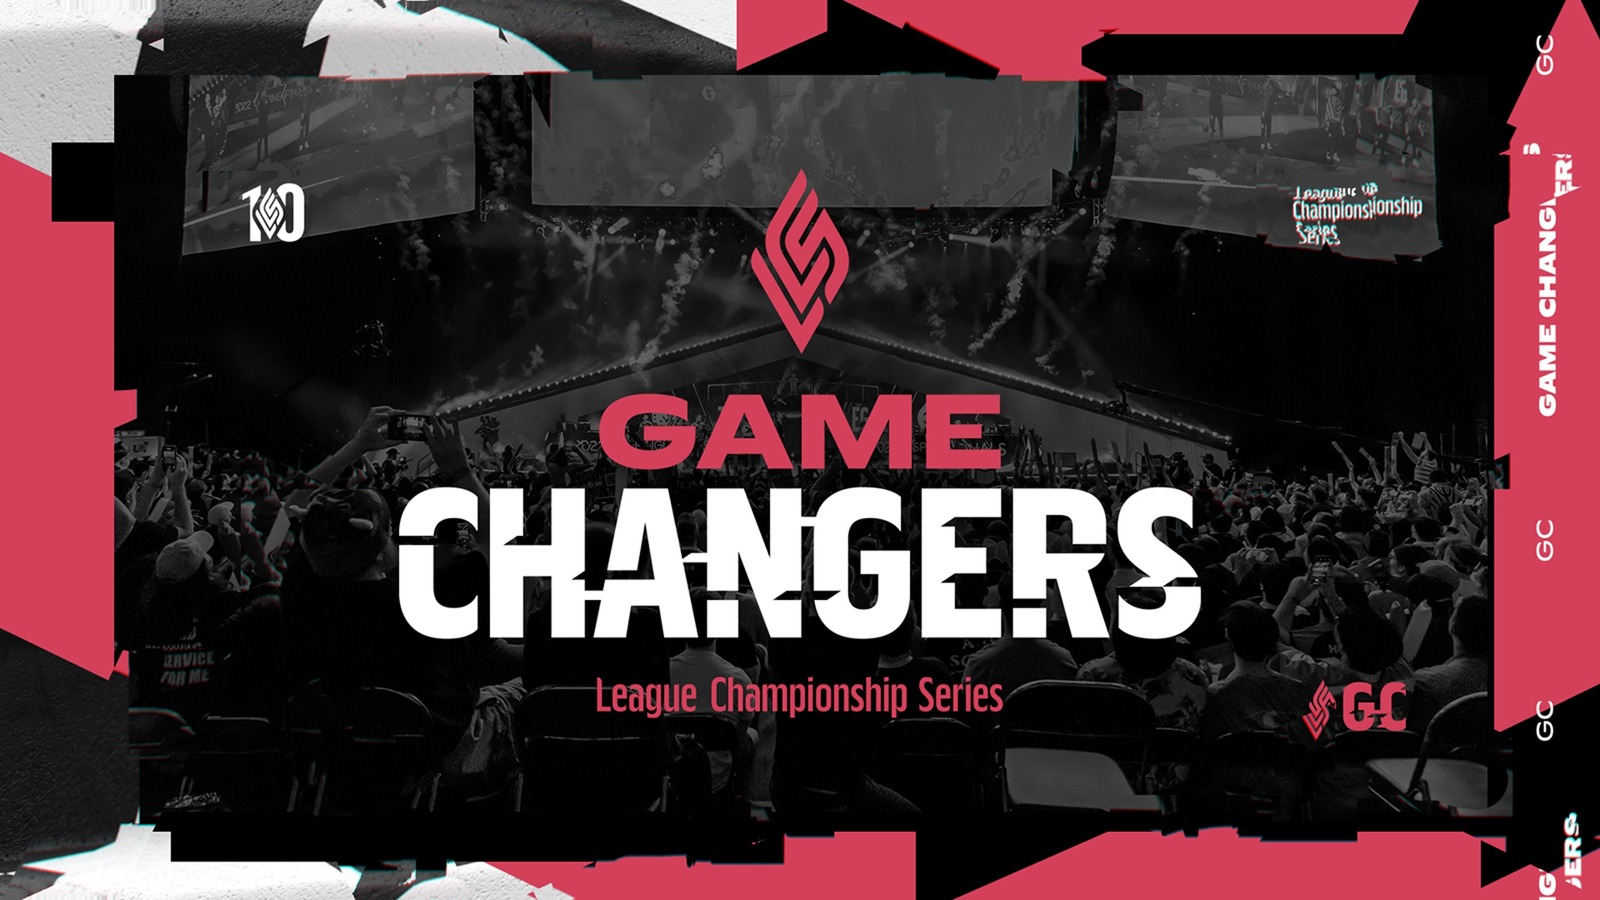 Meet the teams competing in the 2023 Game Changers Championship